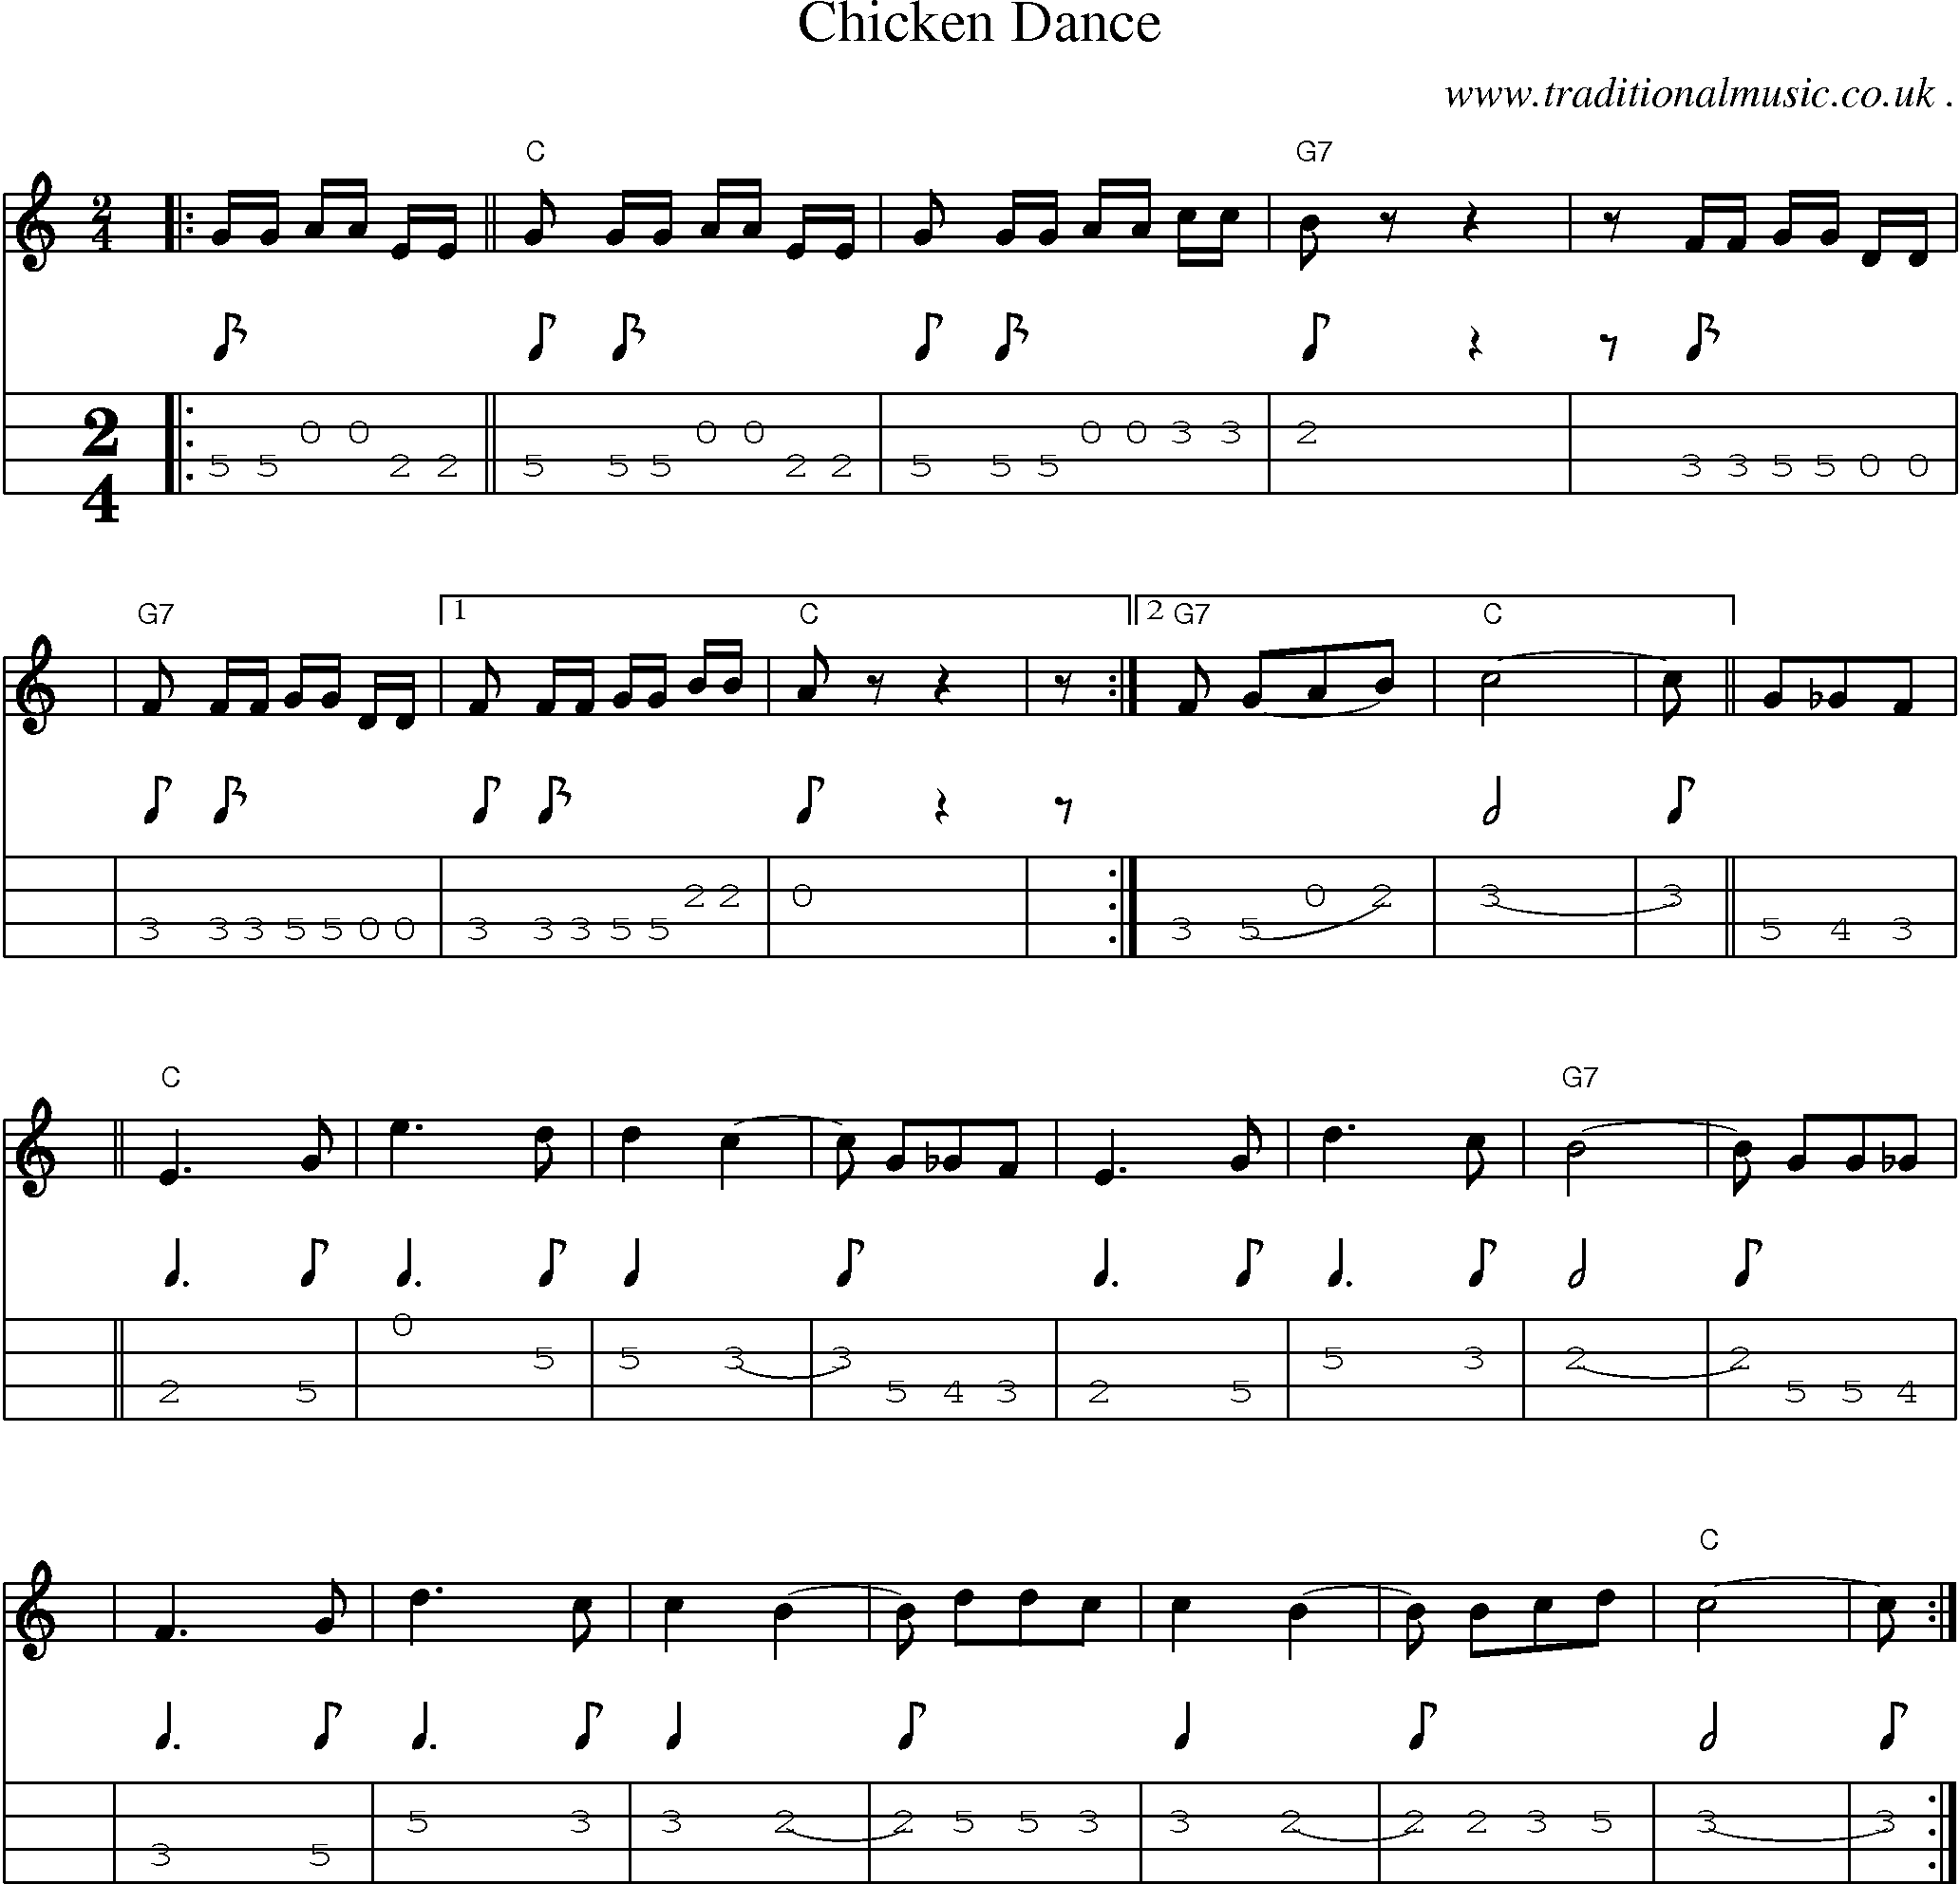 American Old-time music, Scores and Tabs for Mandolin - Chicken Dance